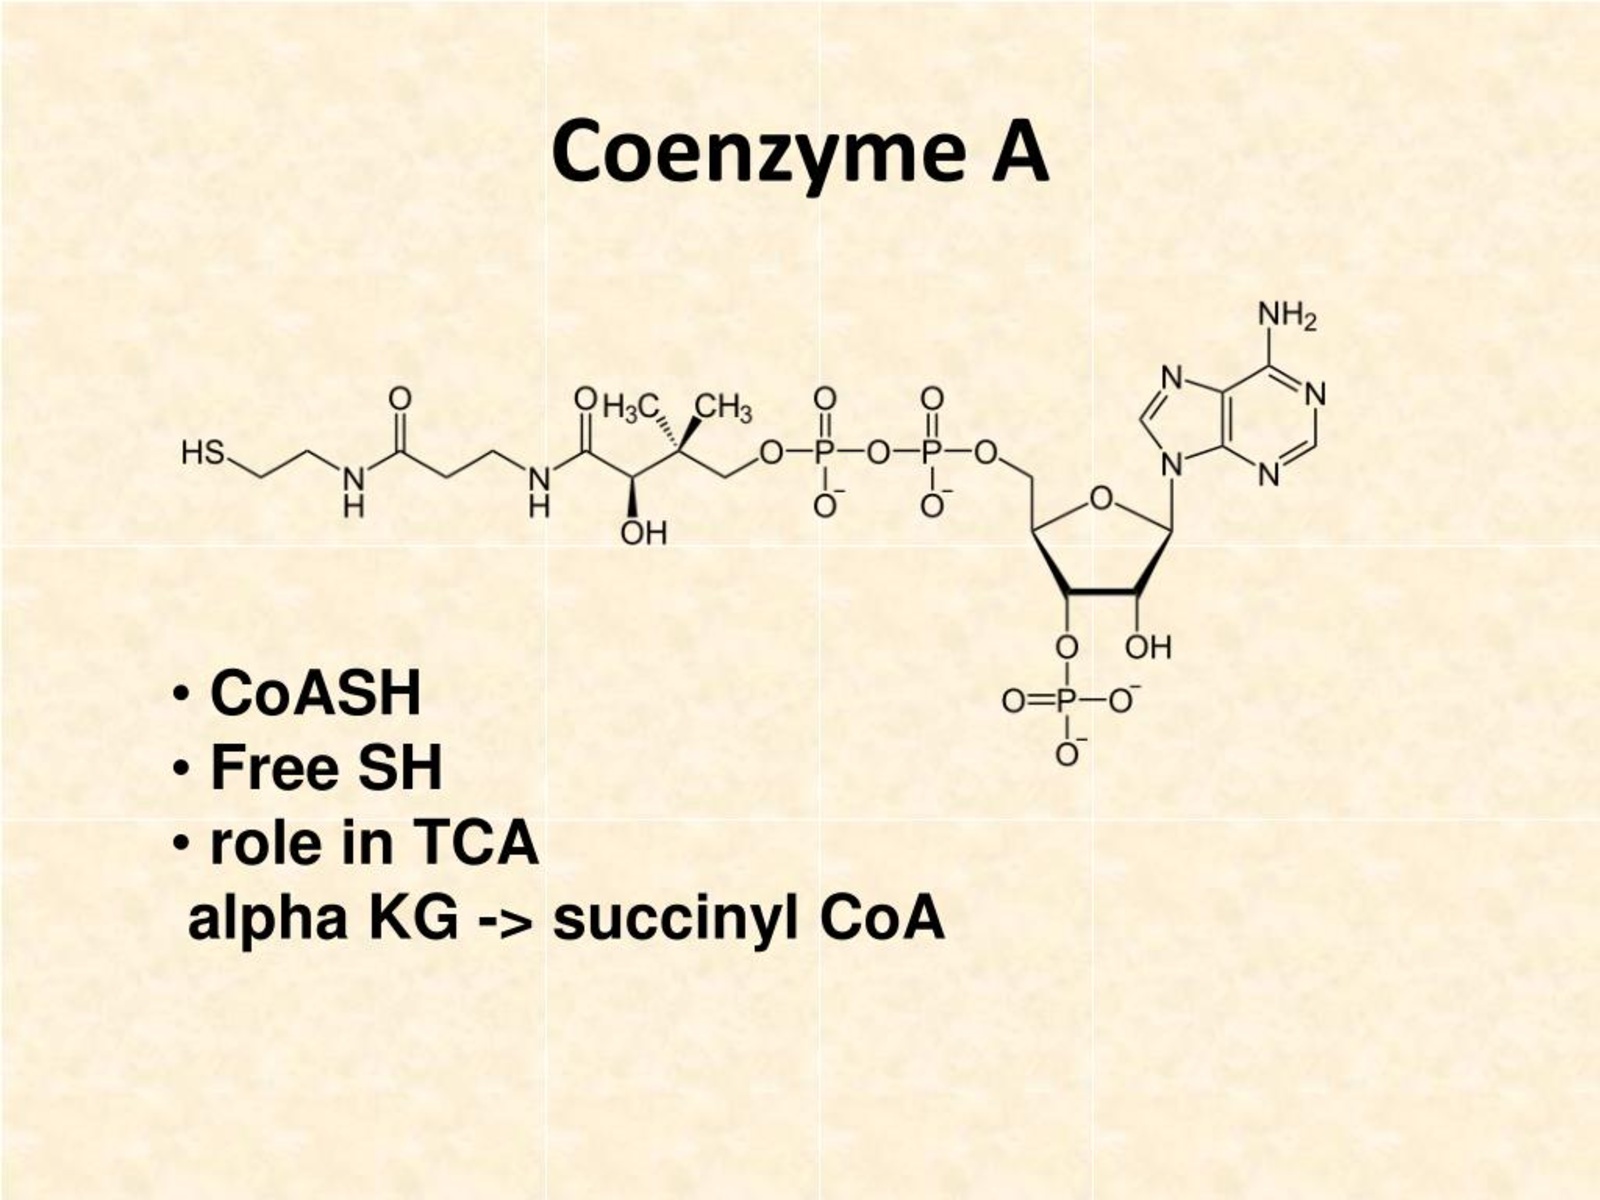 18-intriguing-facts-about-coenzyme-a-coa